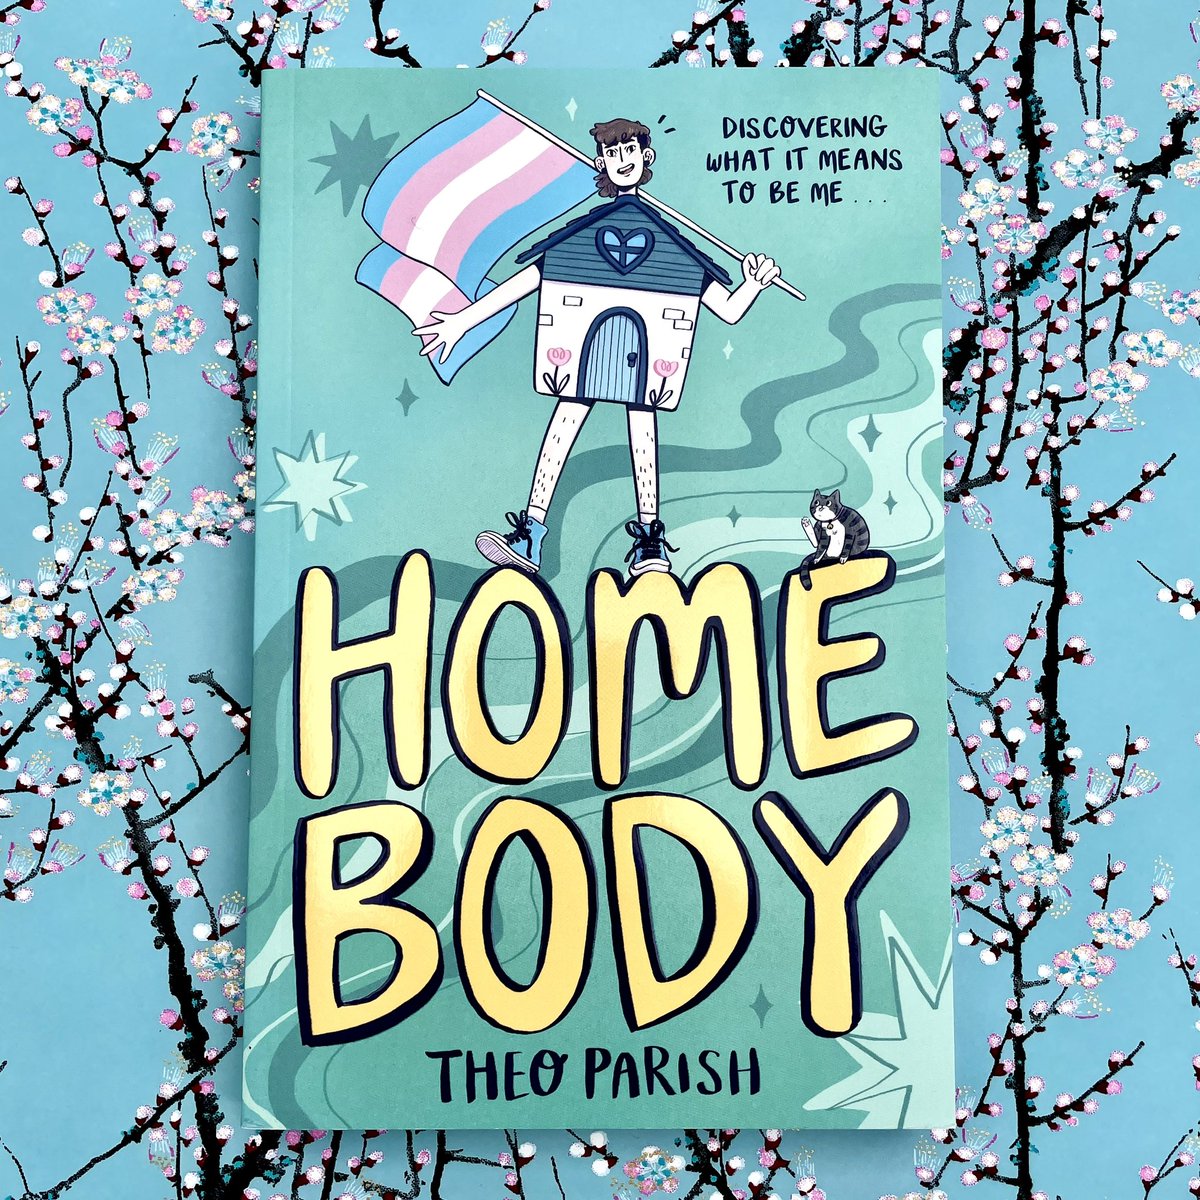 It’s Homebody Eve - at last! Out tomorrow! And it is WONDERFUL. Thank you @theoblue_jpg, you have absolutely nailed it. And thank you universe for the perfect timing. This book will bring comfort, hope and reassurance to young folks just when they need it most. 💛🤍💜🖤🏳️‍⚧️